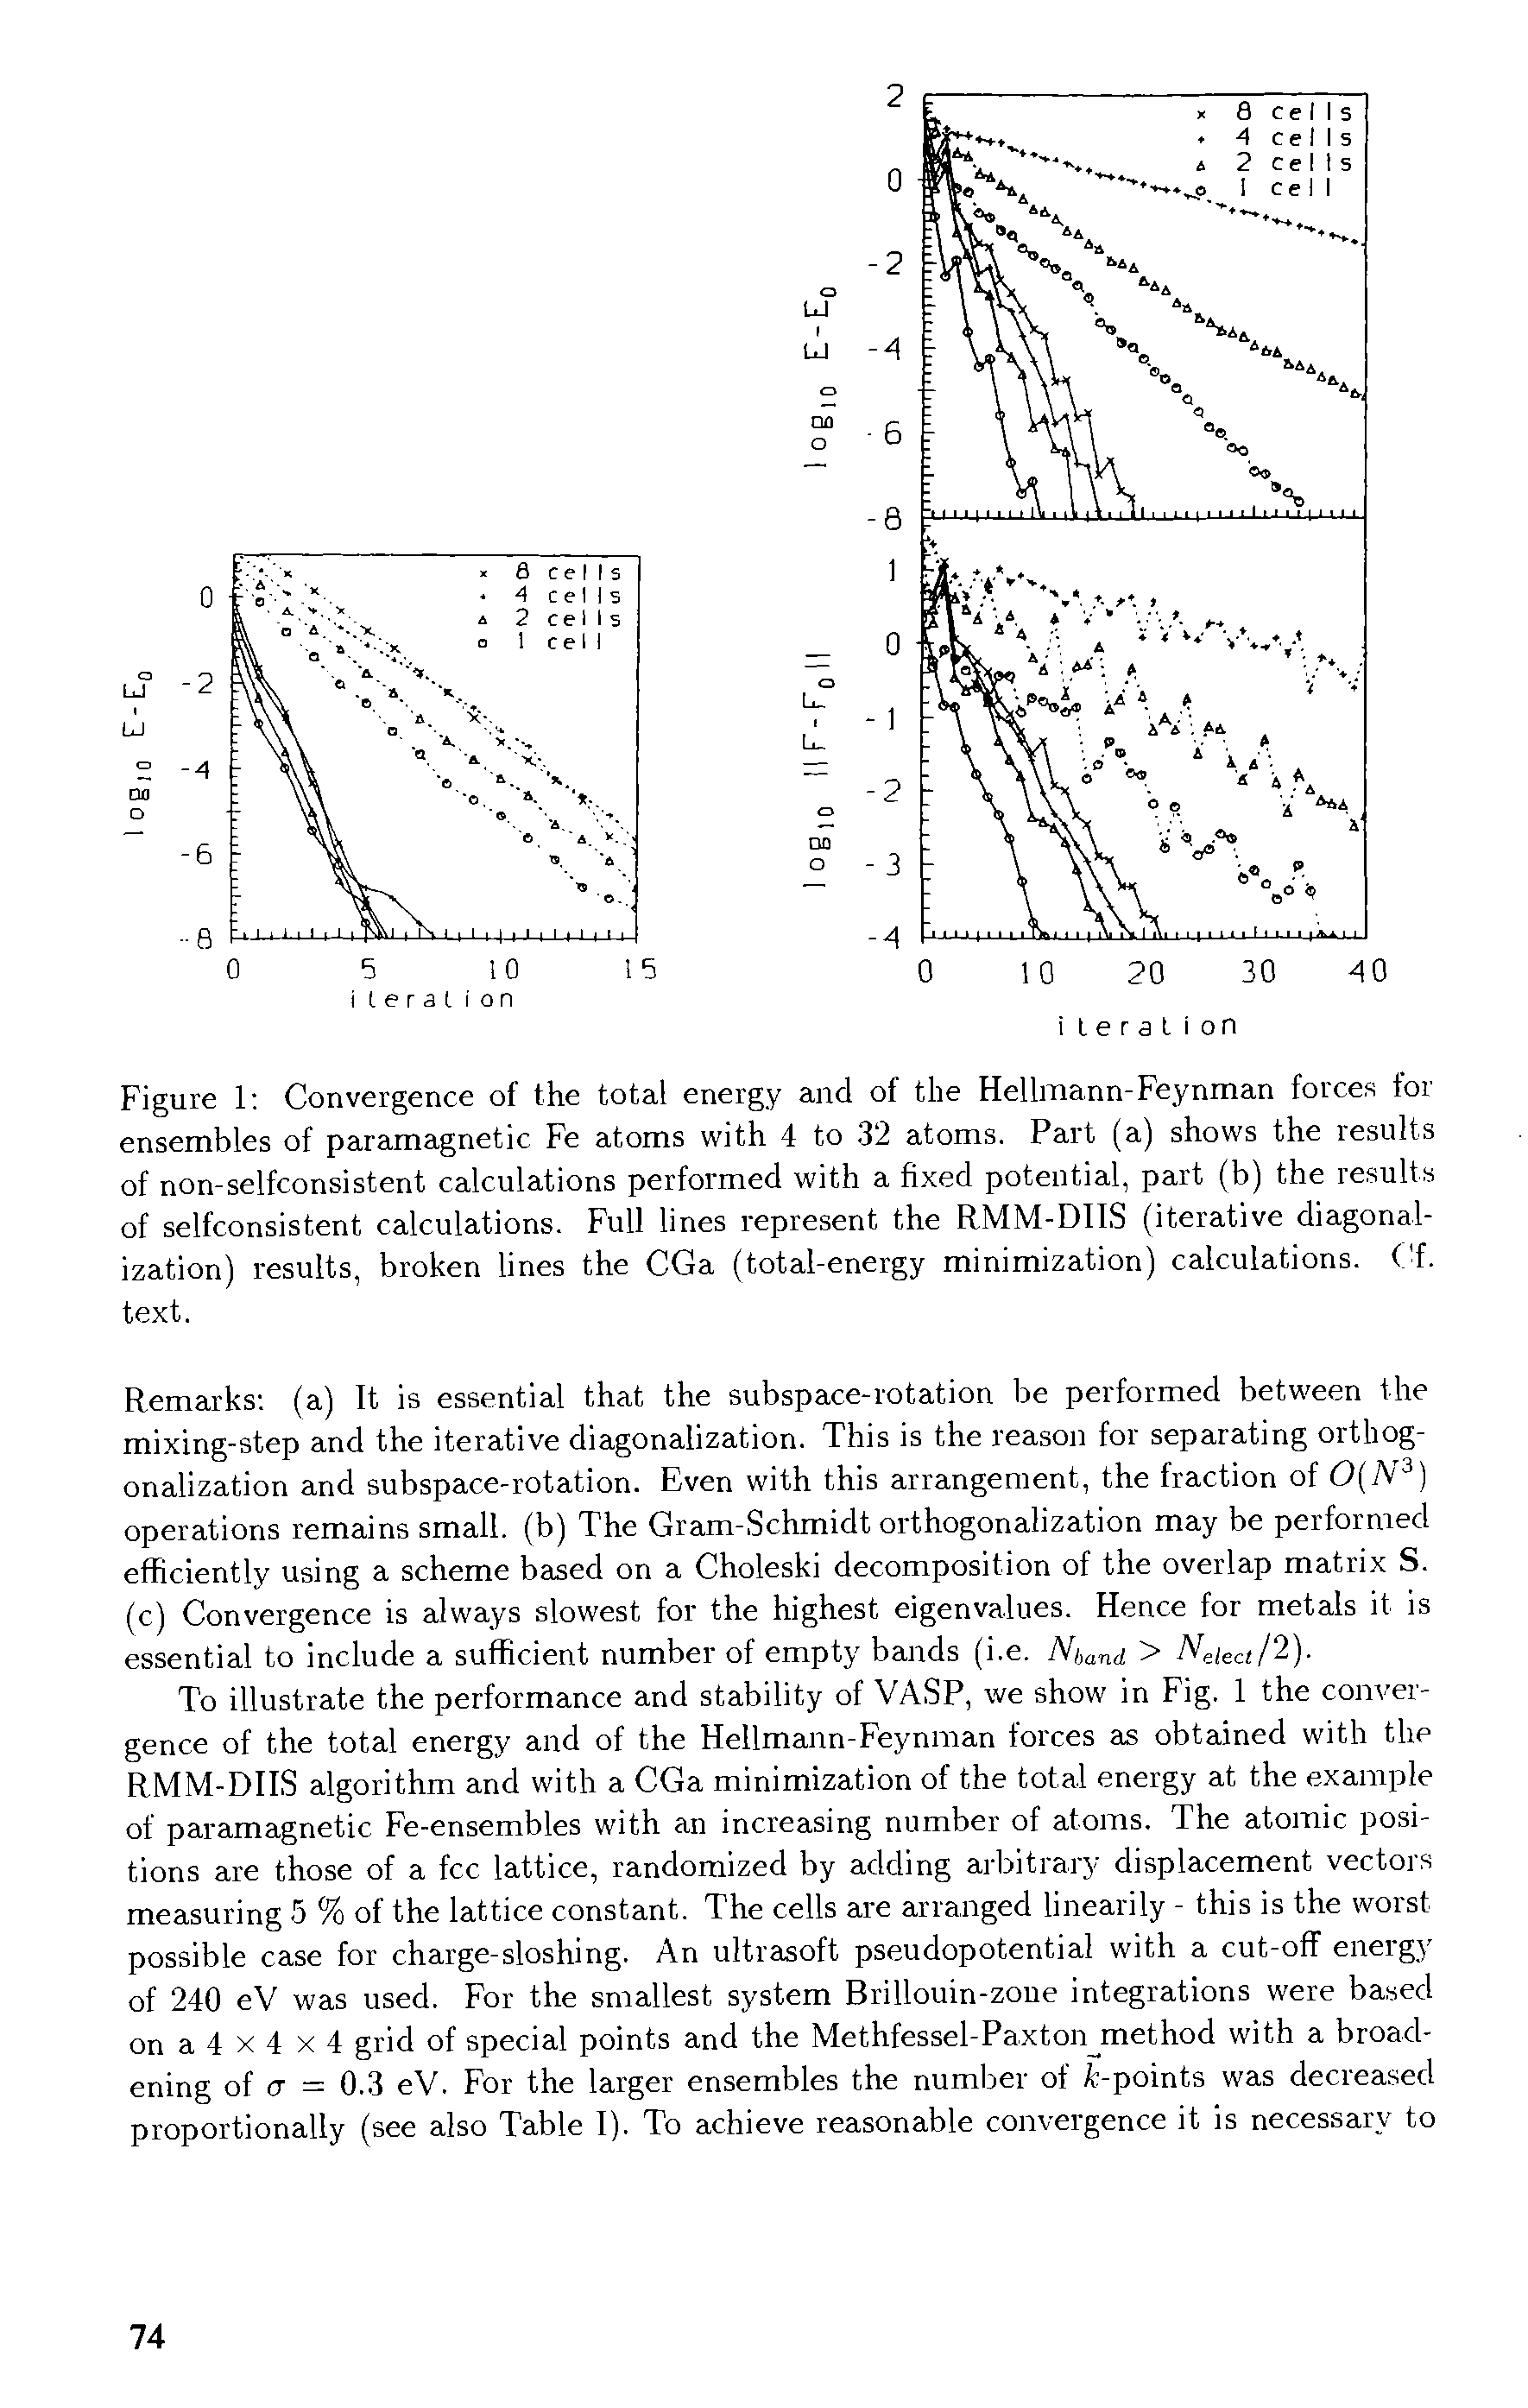 Figure 1 Convergence of the total energy and of the Hellmann-Feynman forces for ensembles of paramagnetic Fe atoms with 4 to 32 atoms. Part (a) shows the results of non-selfconsistent calculations performed with a fixed potential, part (b) the results of selfconsistent calculations. Full lines represent the RMM-DIIS (iterative diagonal-ization) results, broken lines the CGa (total-energy minimization) calculations. (4. text.